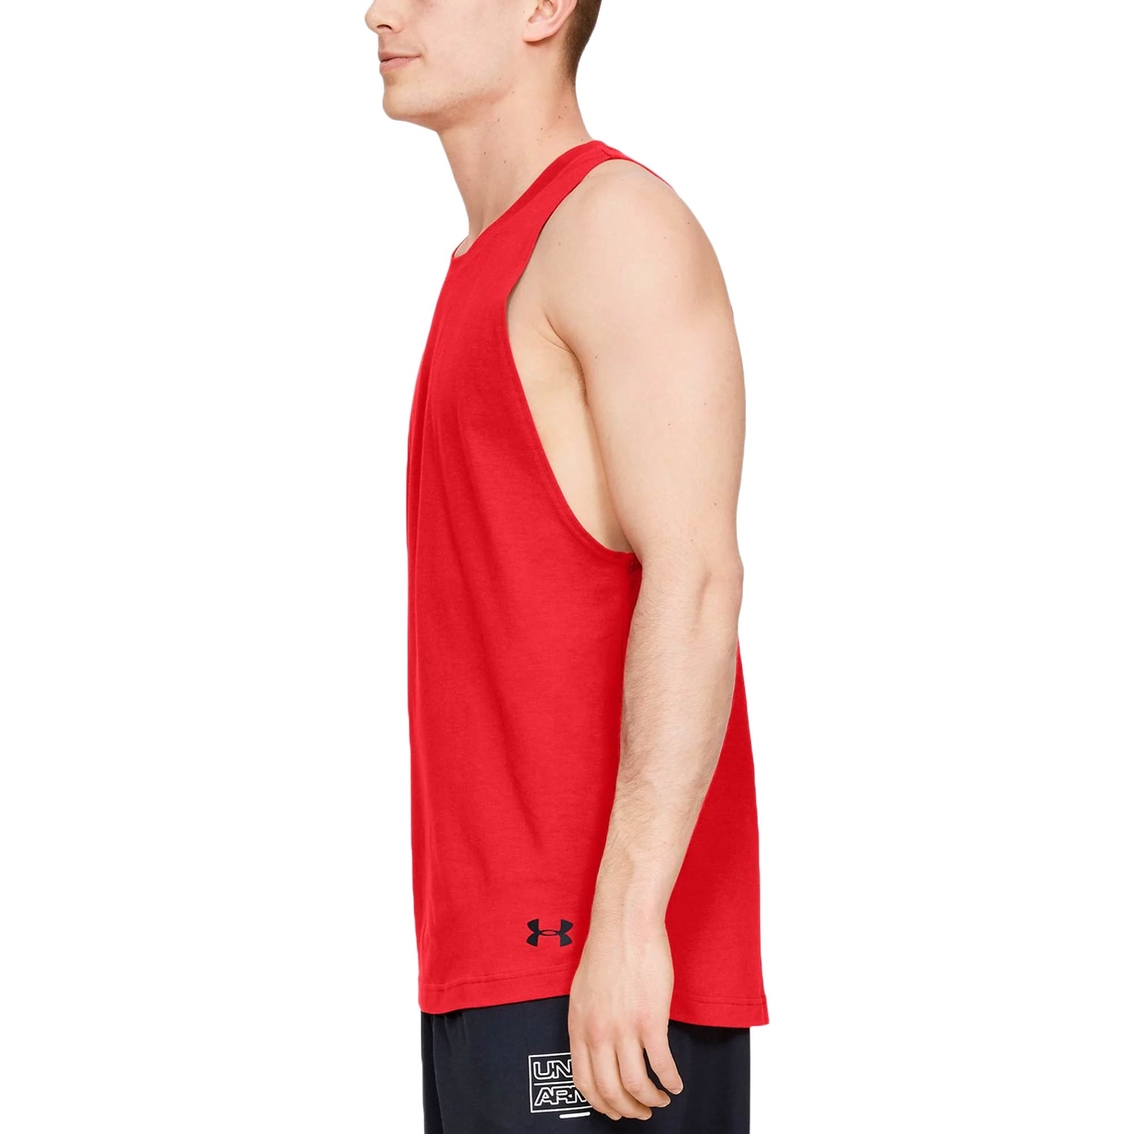 Under Armour Baseline Tank Top - Image 3 of 6